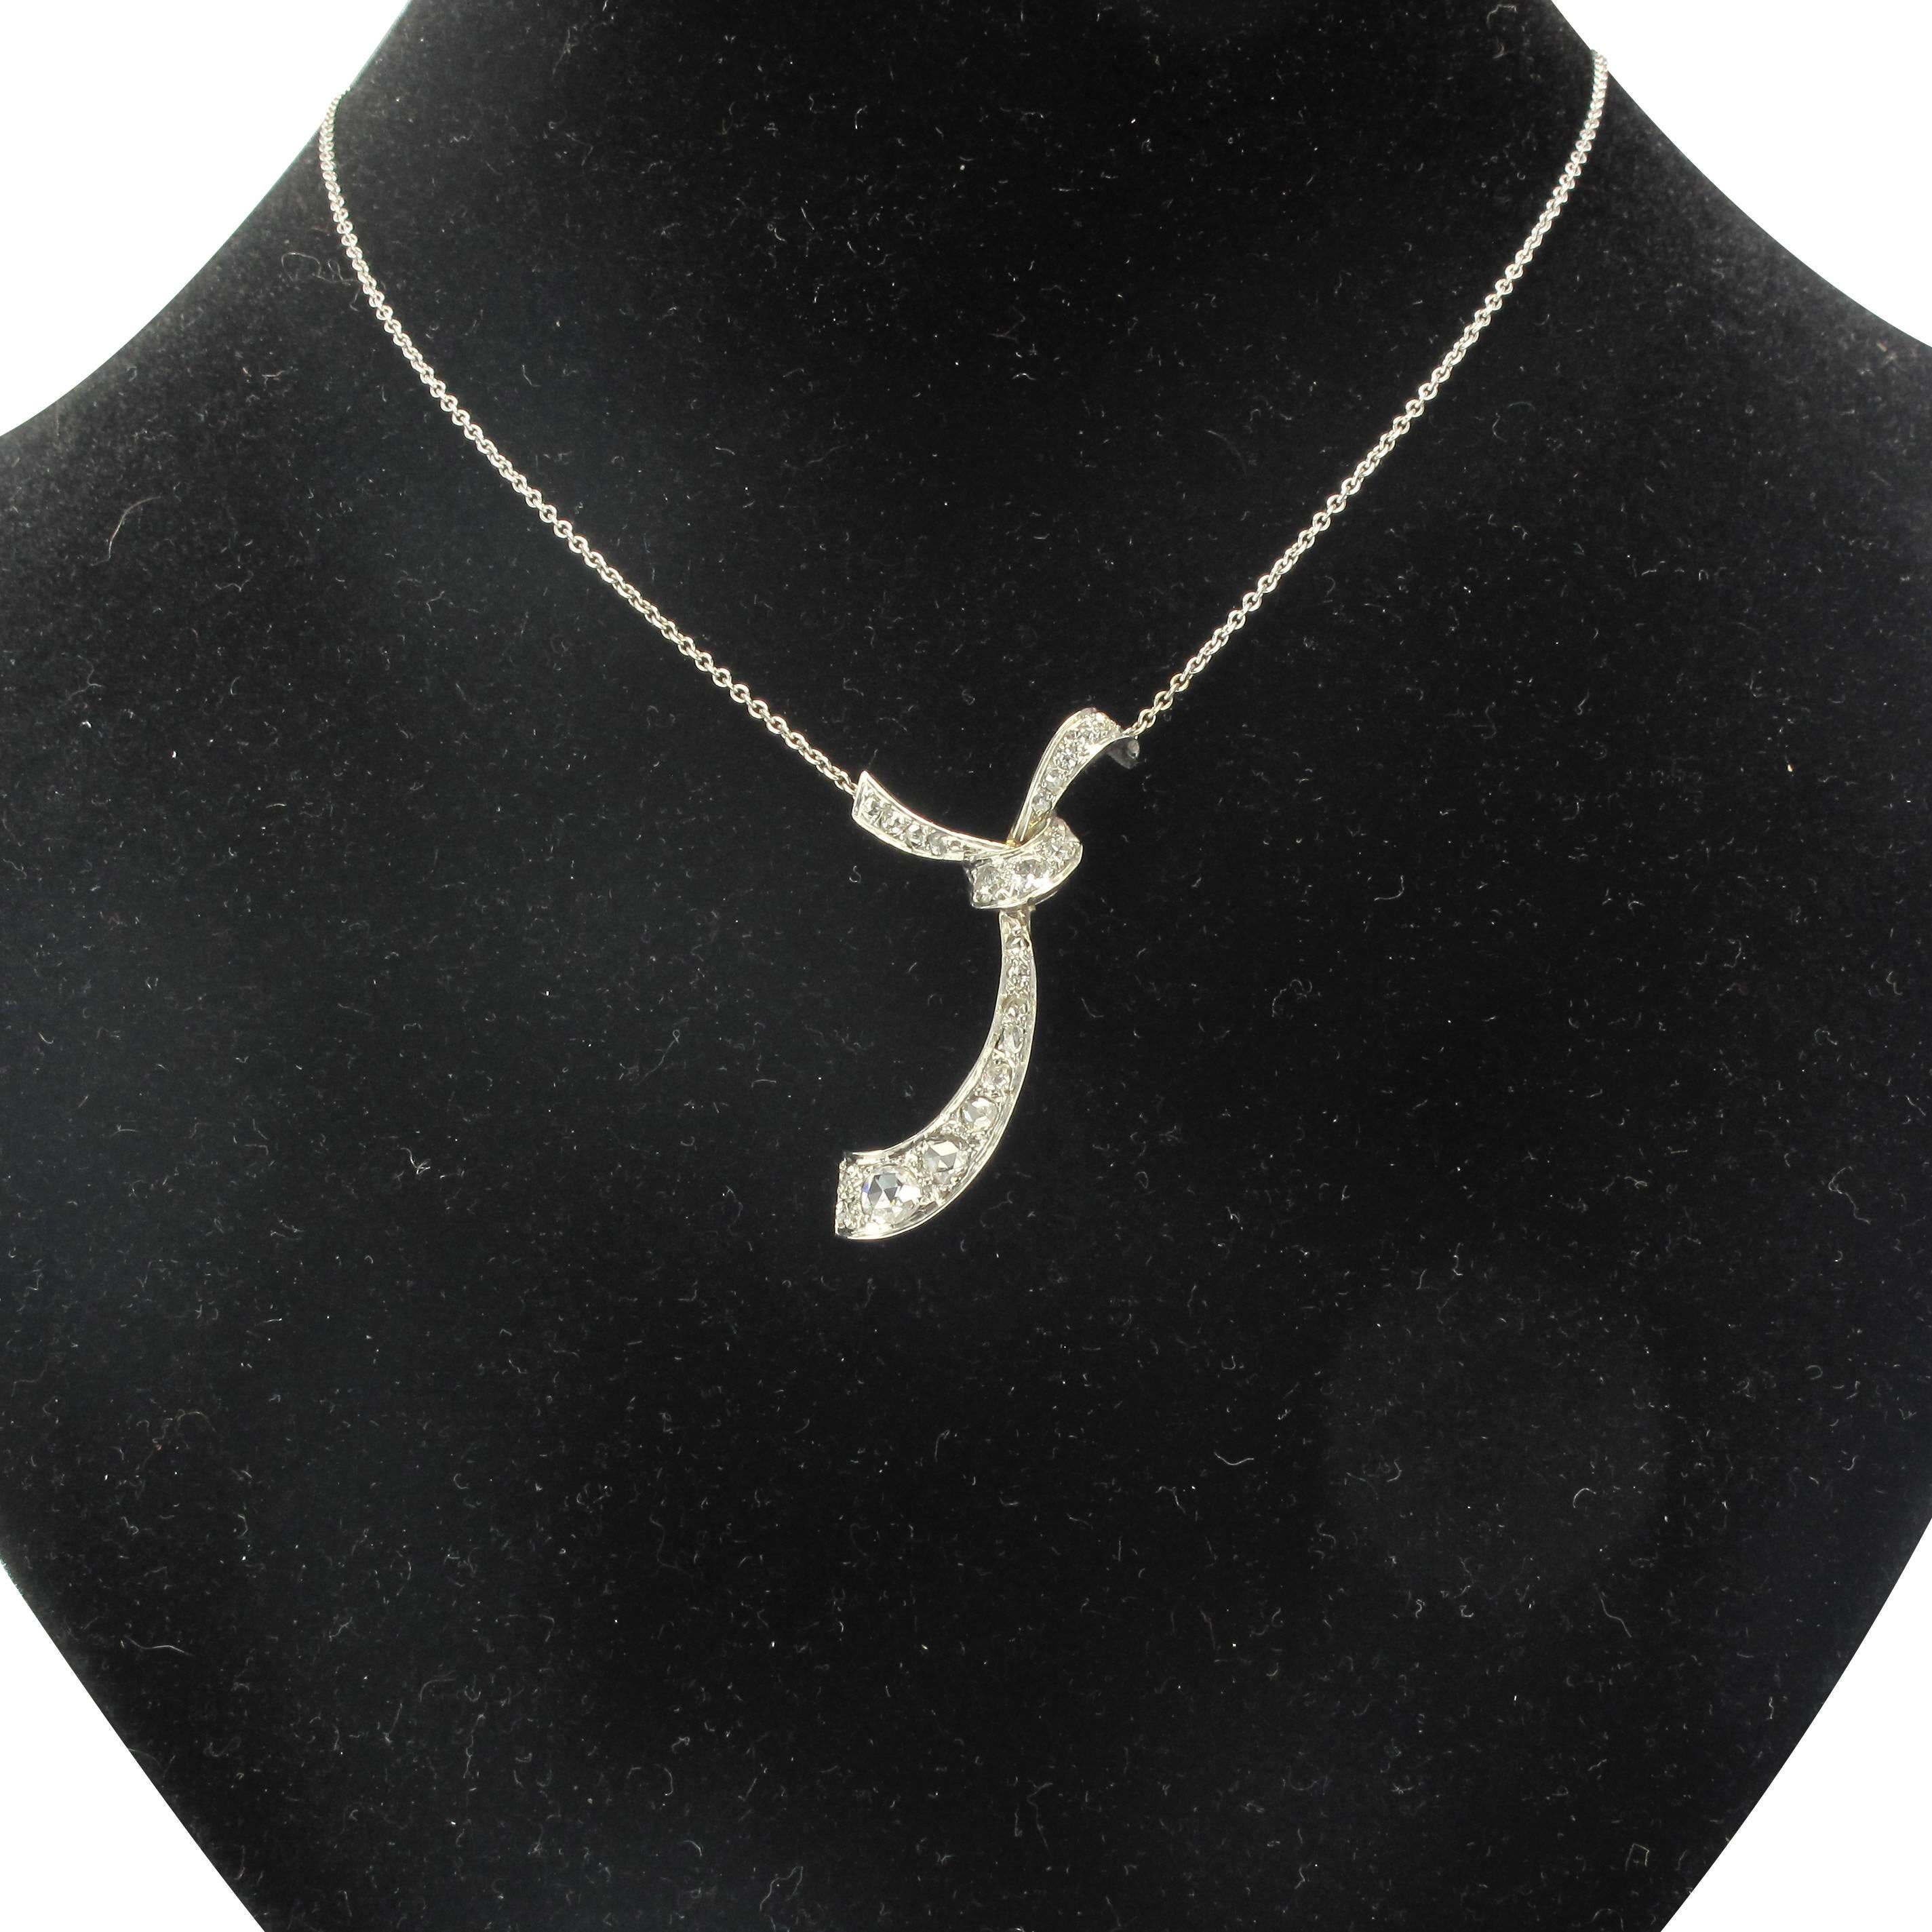 Necklace in 18 carat white gold, eagle head hallmark.

This superb antique necklace is composed of a belcher chain from which is suspended a motif in the form of a tie that is entirely set with rose cut diamonds. The clasp is a spring ring.